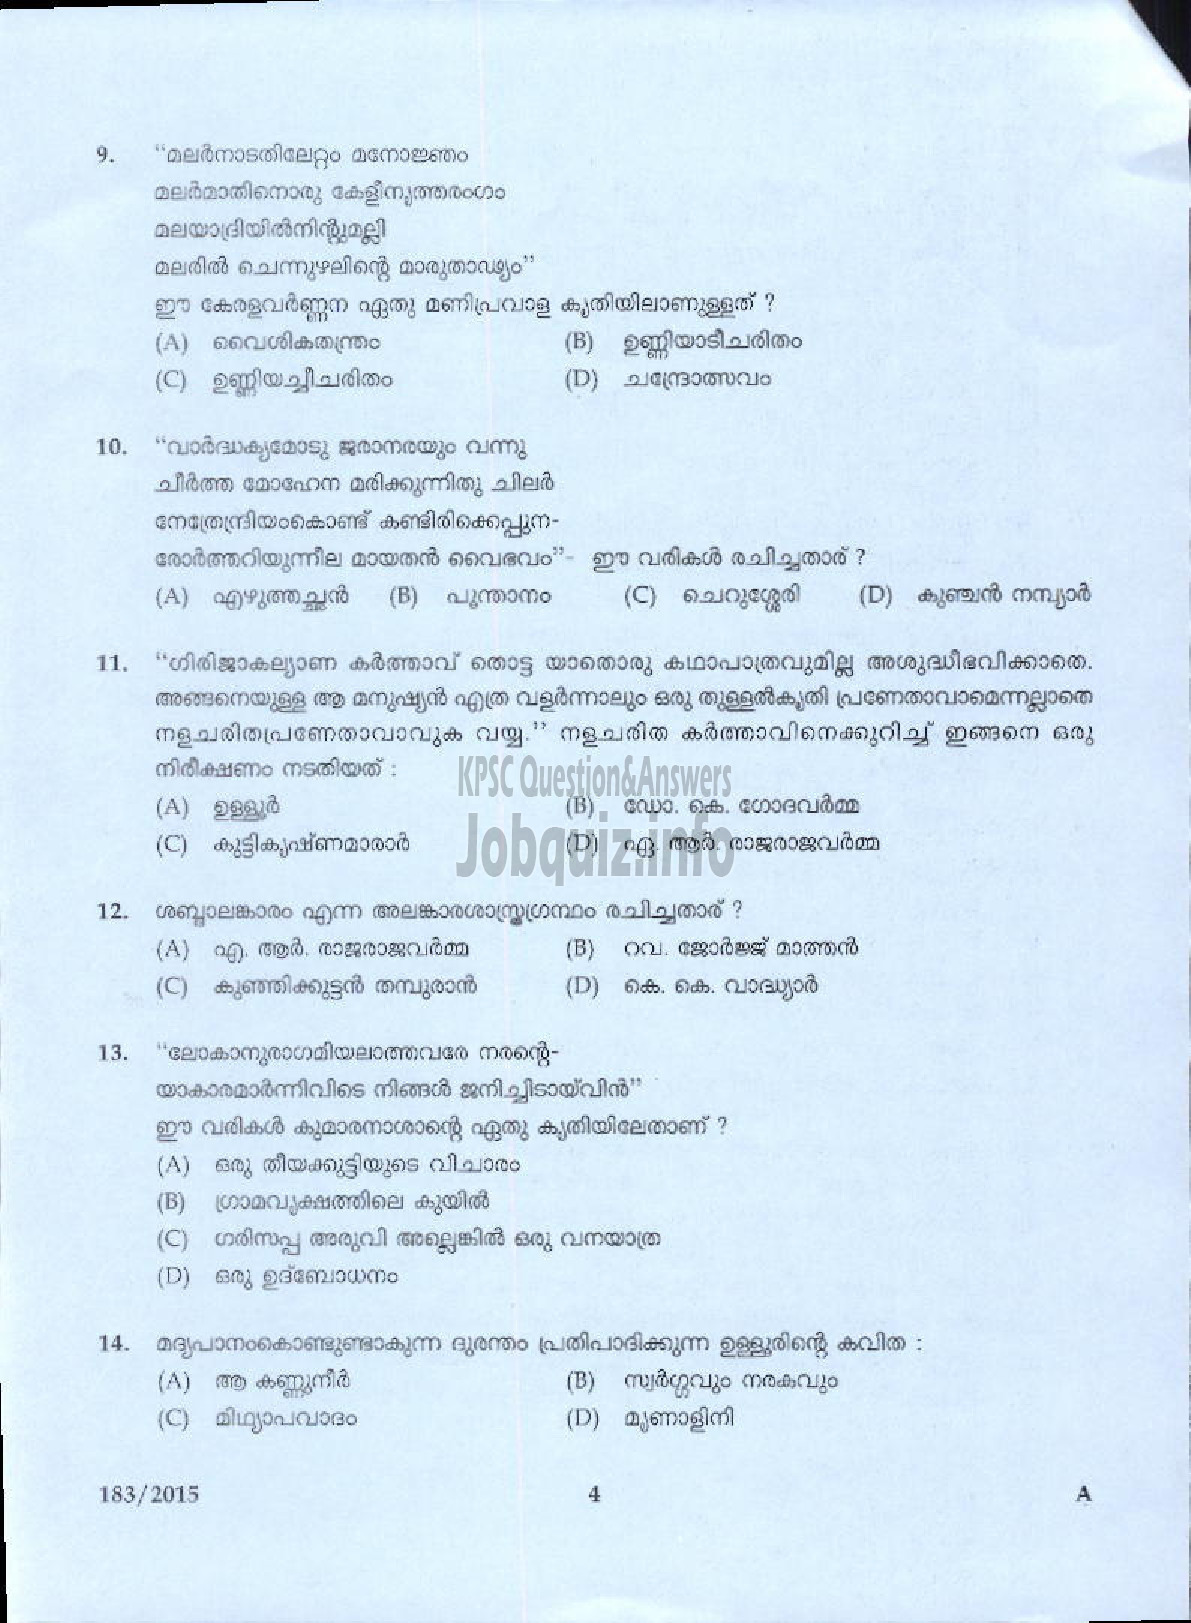 Kerala PSC Question Paper - LECTURER IN MALAYALAM COLLEGIATE EDUCATION-2